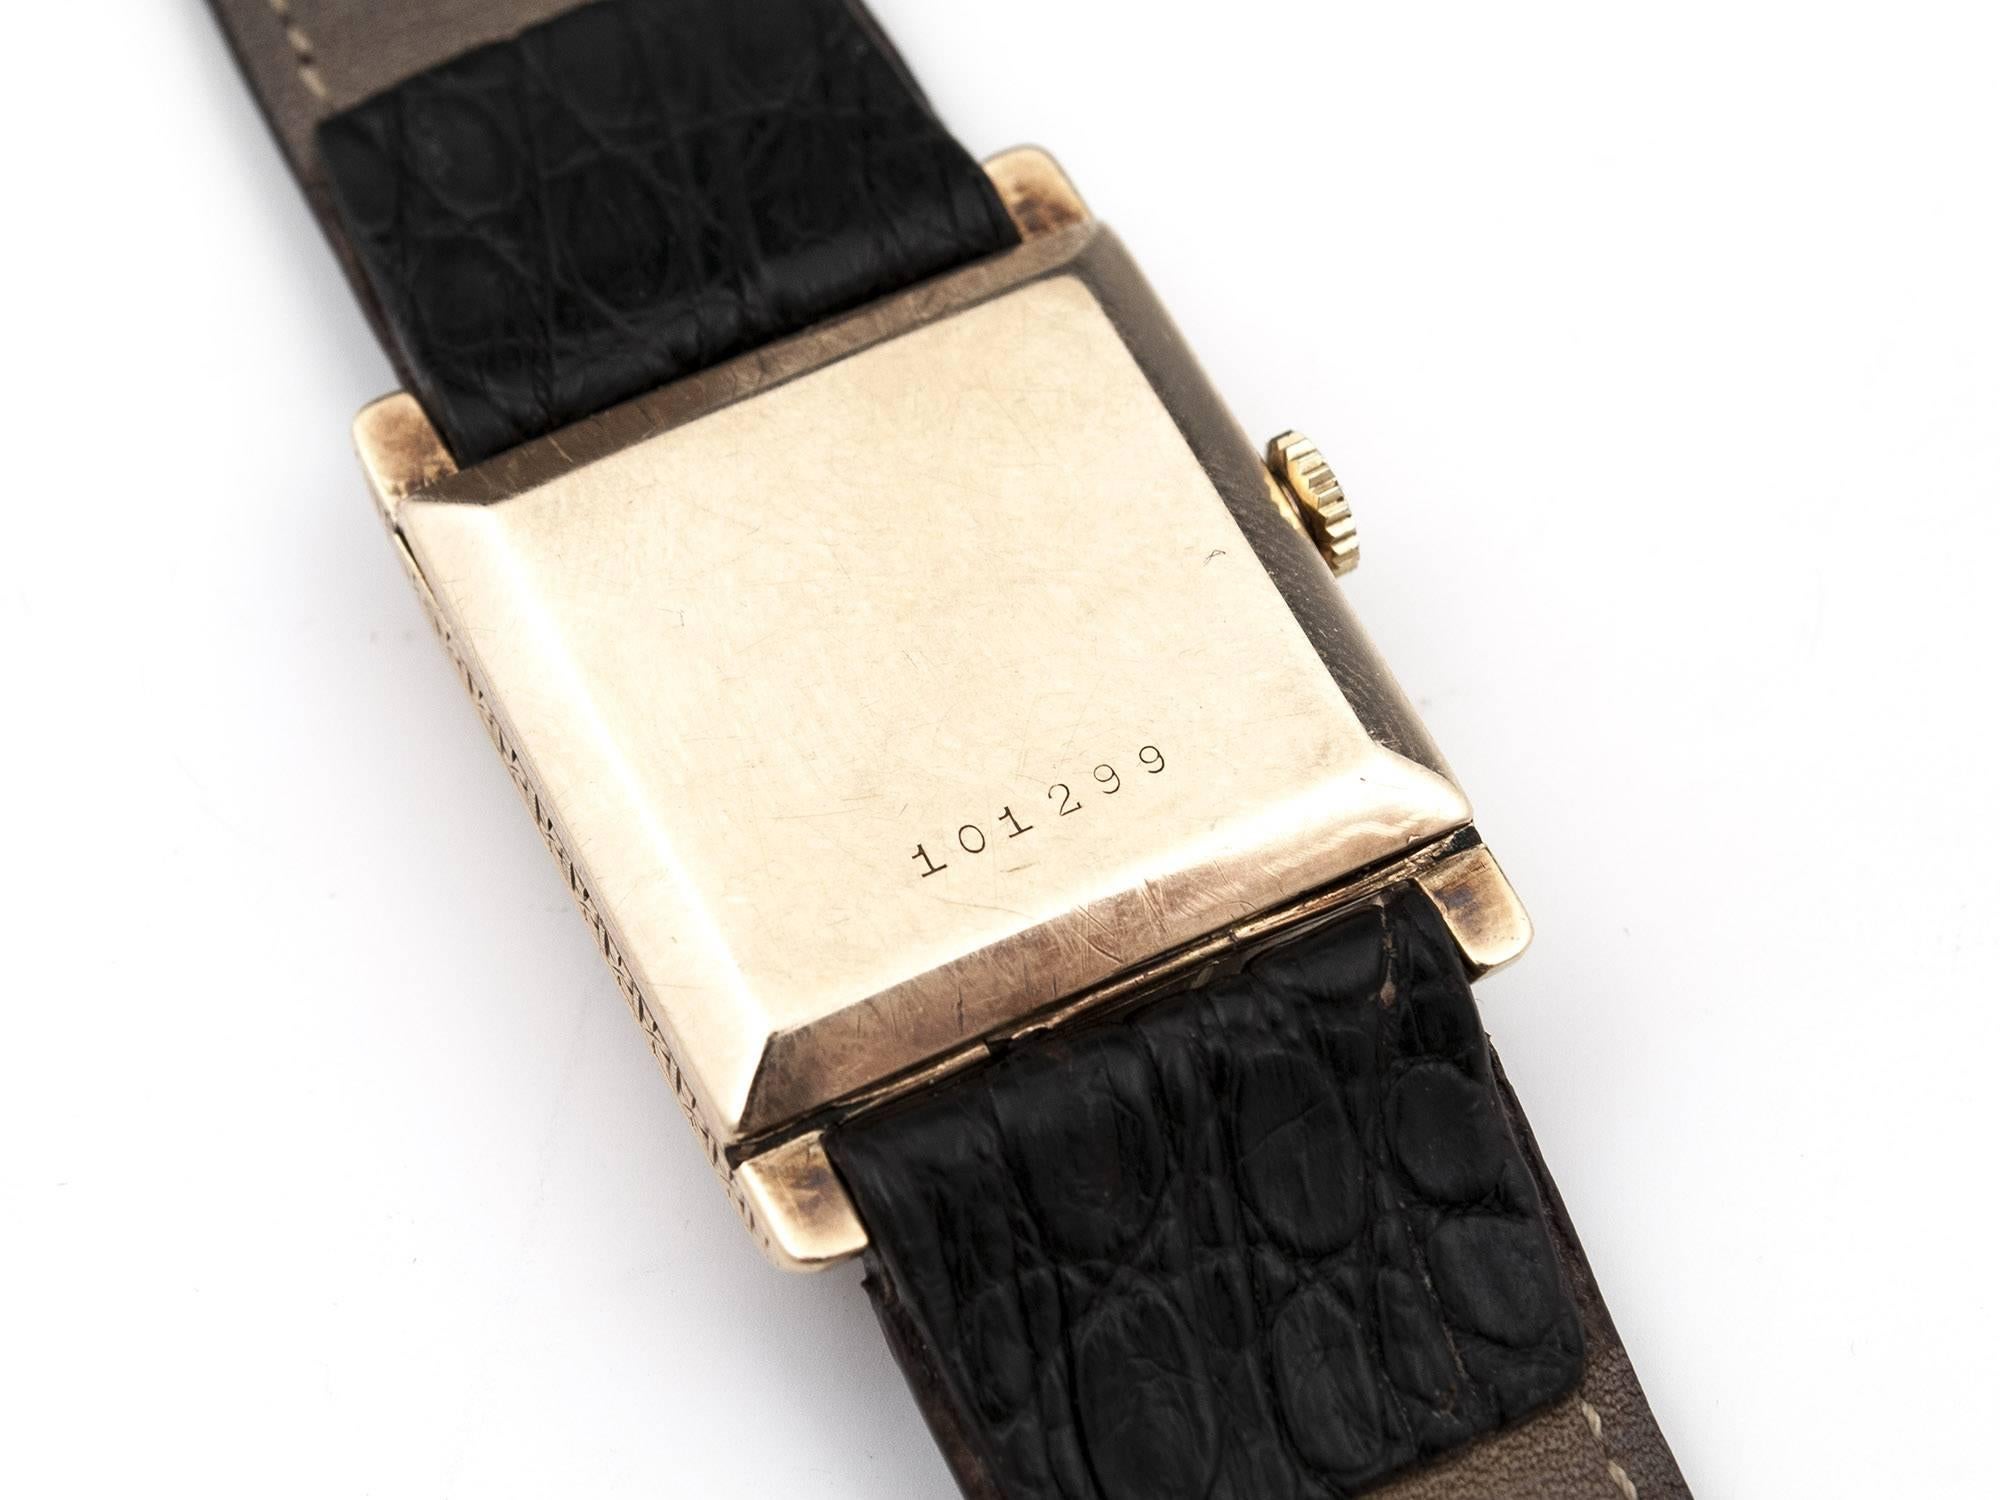 20th Century Art Deco Gold Ovida Square Wrist Watch with Leather Strap For Sale